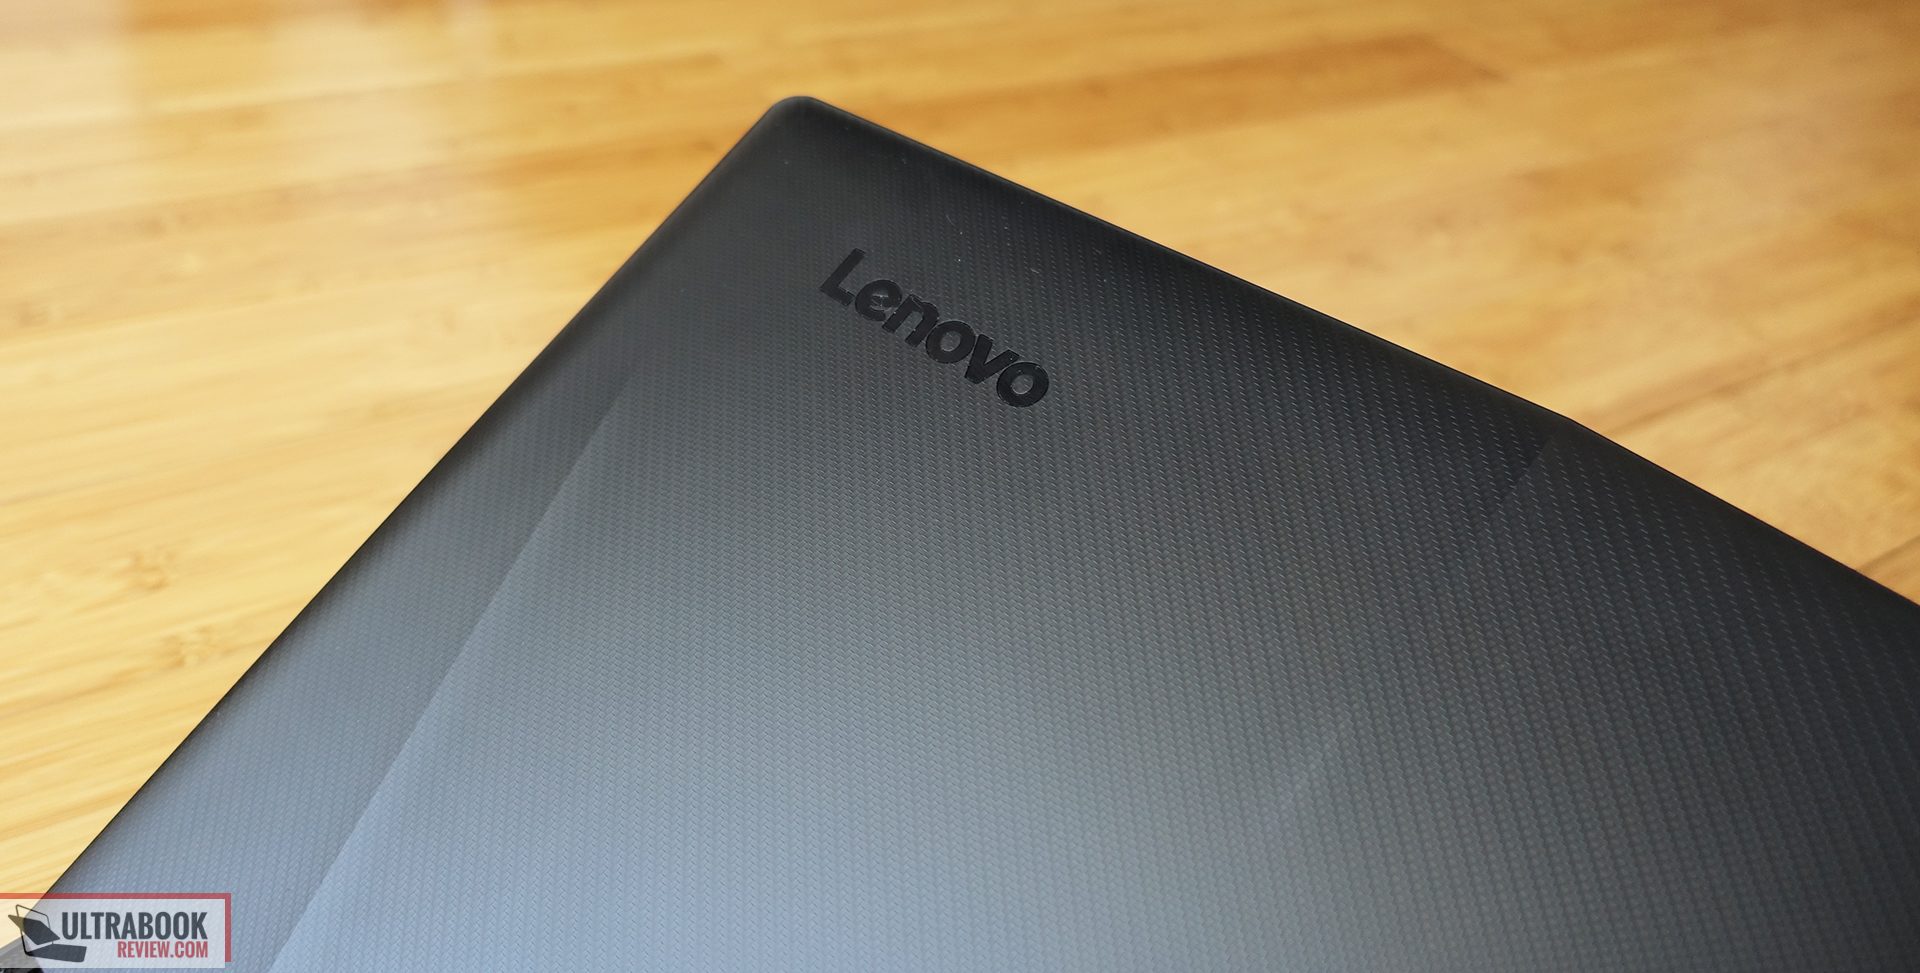 Lenovo Y520 review - bang-for-the-buck gaming laptop at under $900